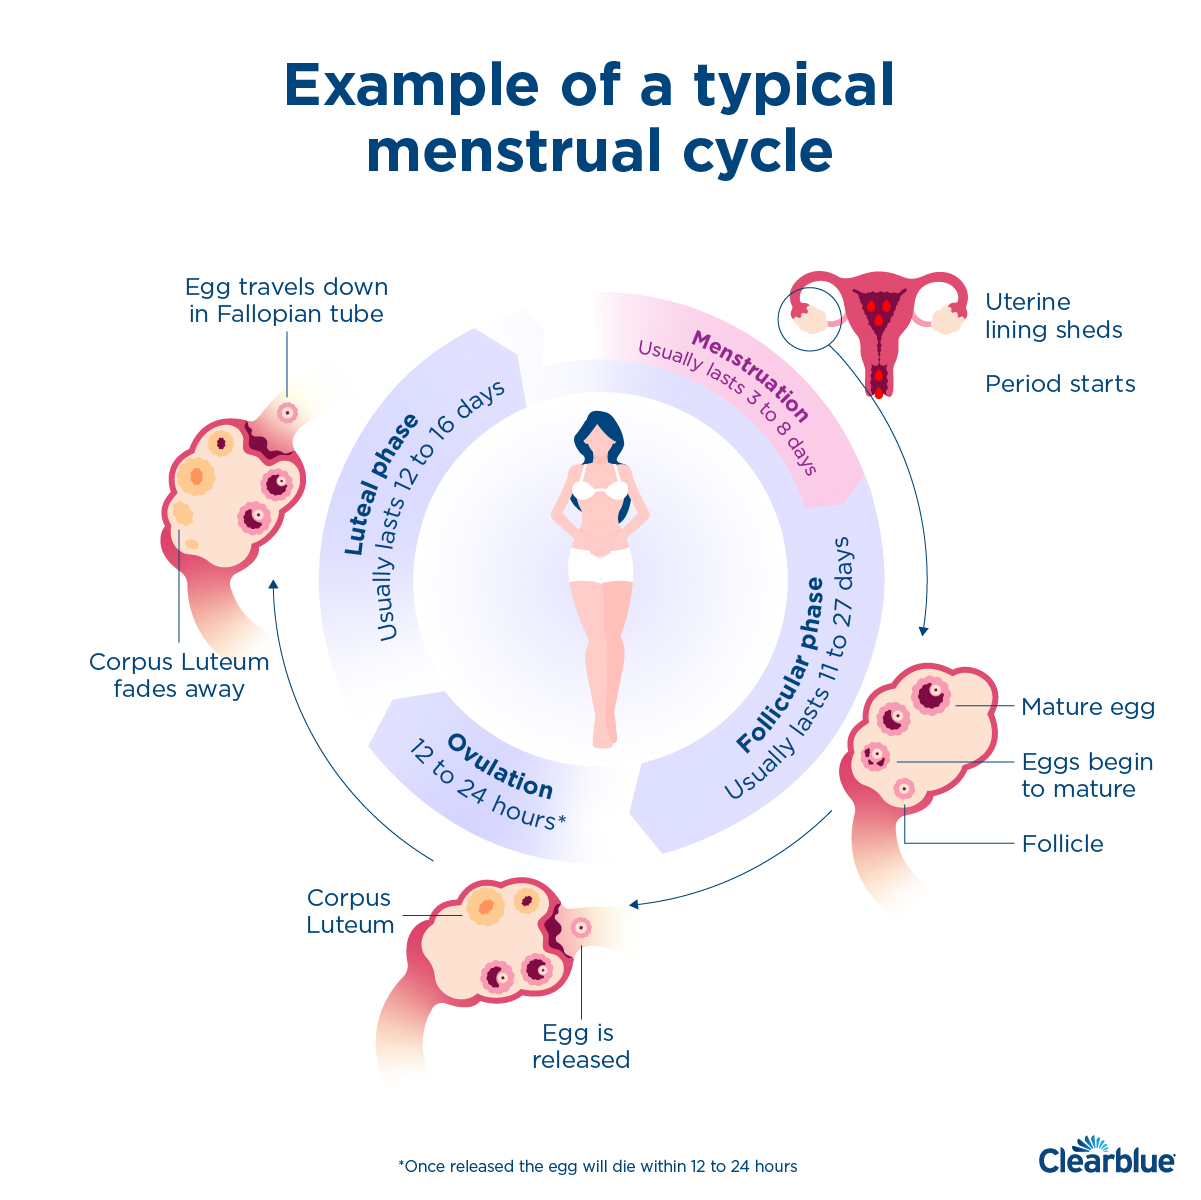 https://www.clearblue.com/sites/default/files/wysiwyg/typical_menstrual_cycle.png